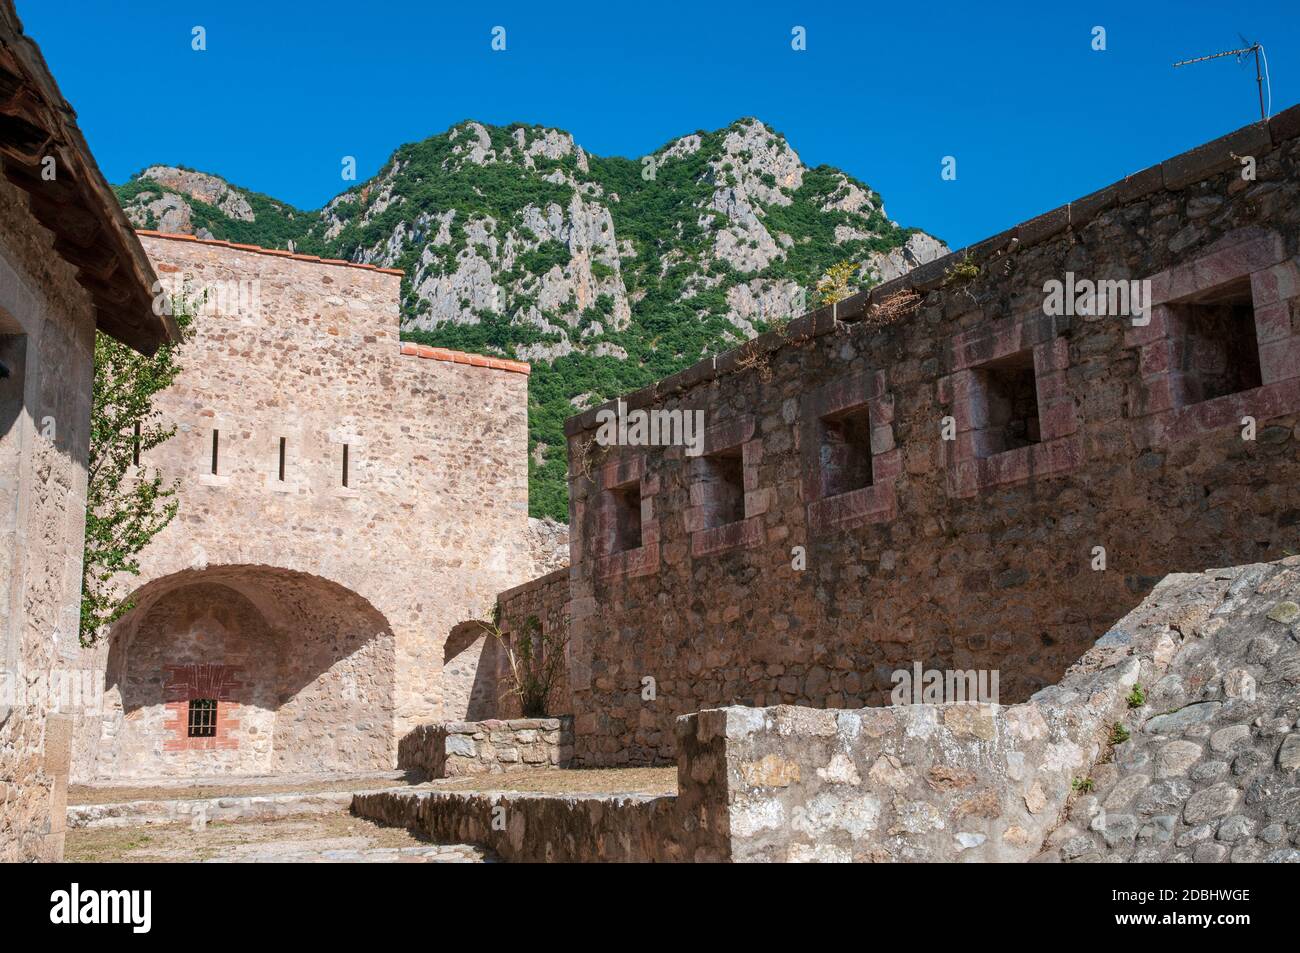 The 11th century medieval town of Villefranche-de-Conflent, listed as one The Most Beautiful Villages of France, Pyrenees-Orientales (66), France Stock Photo